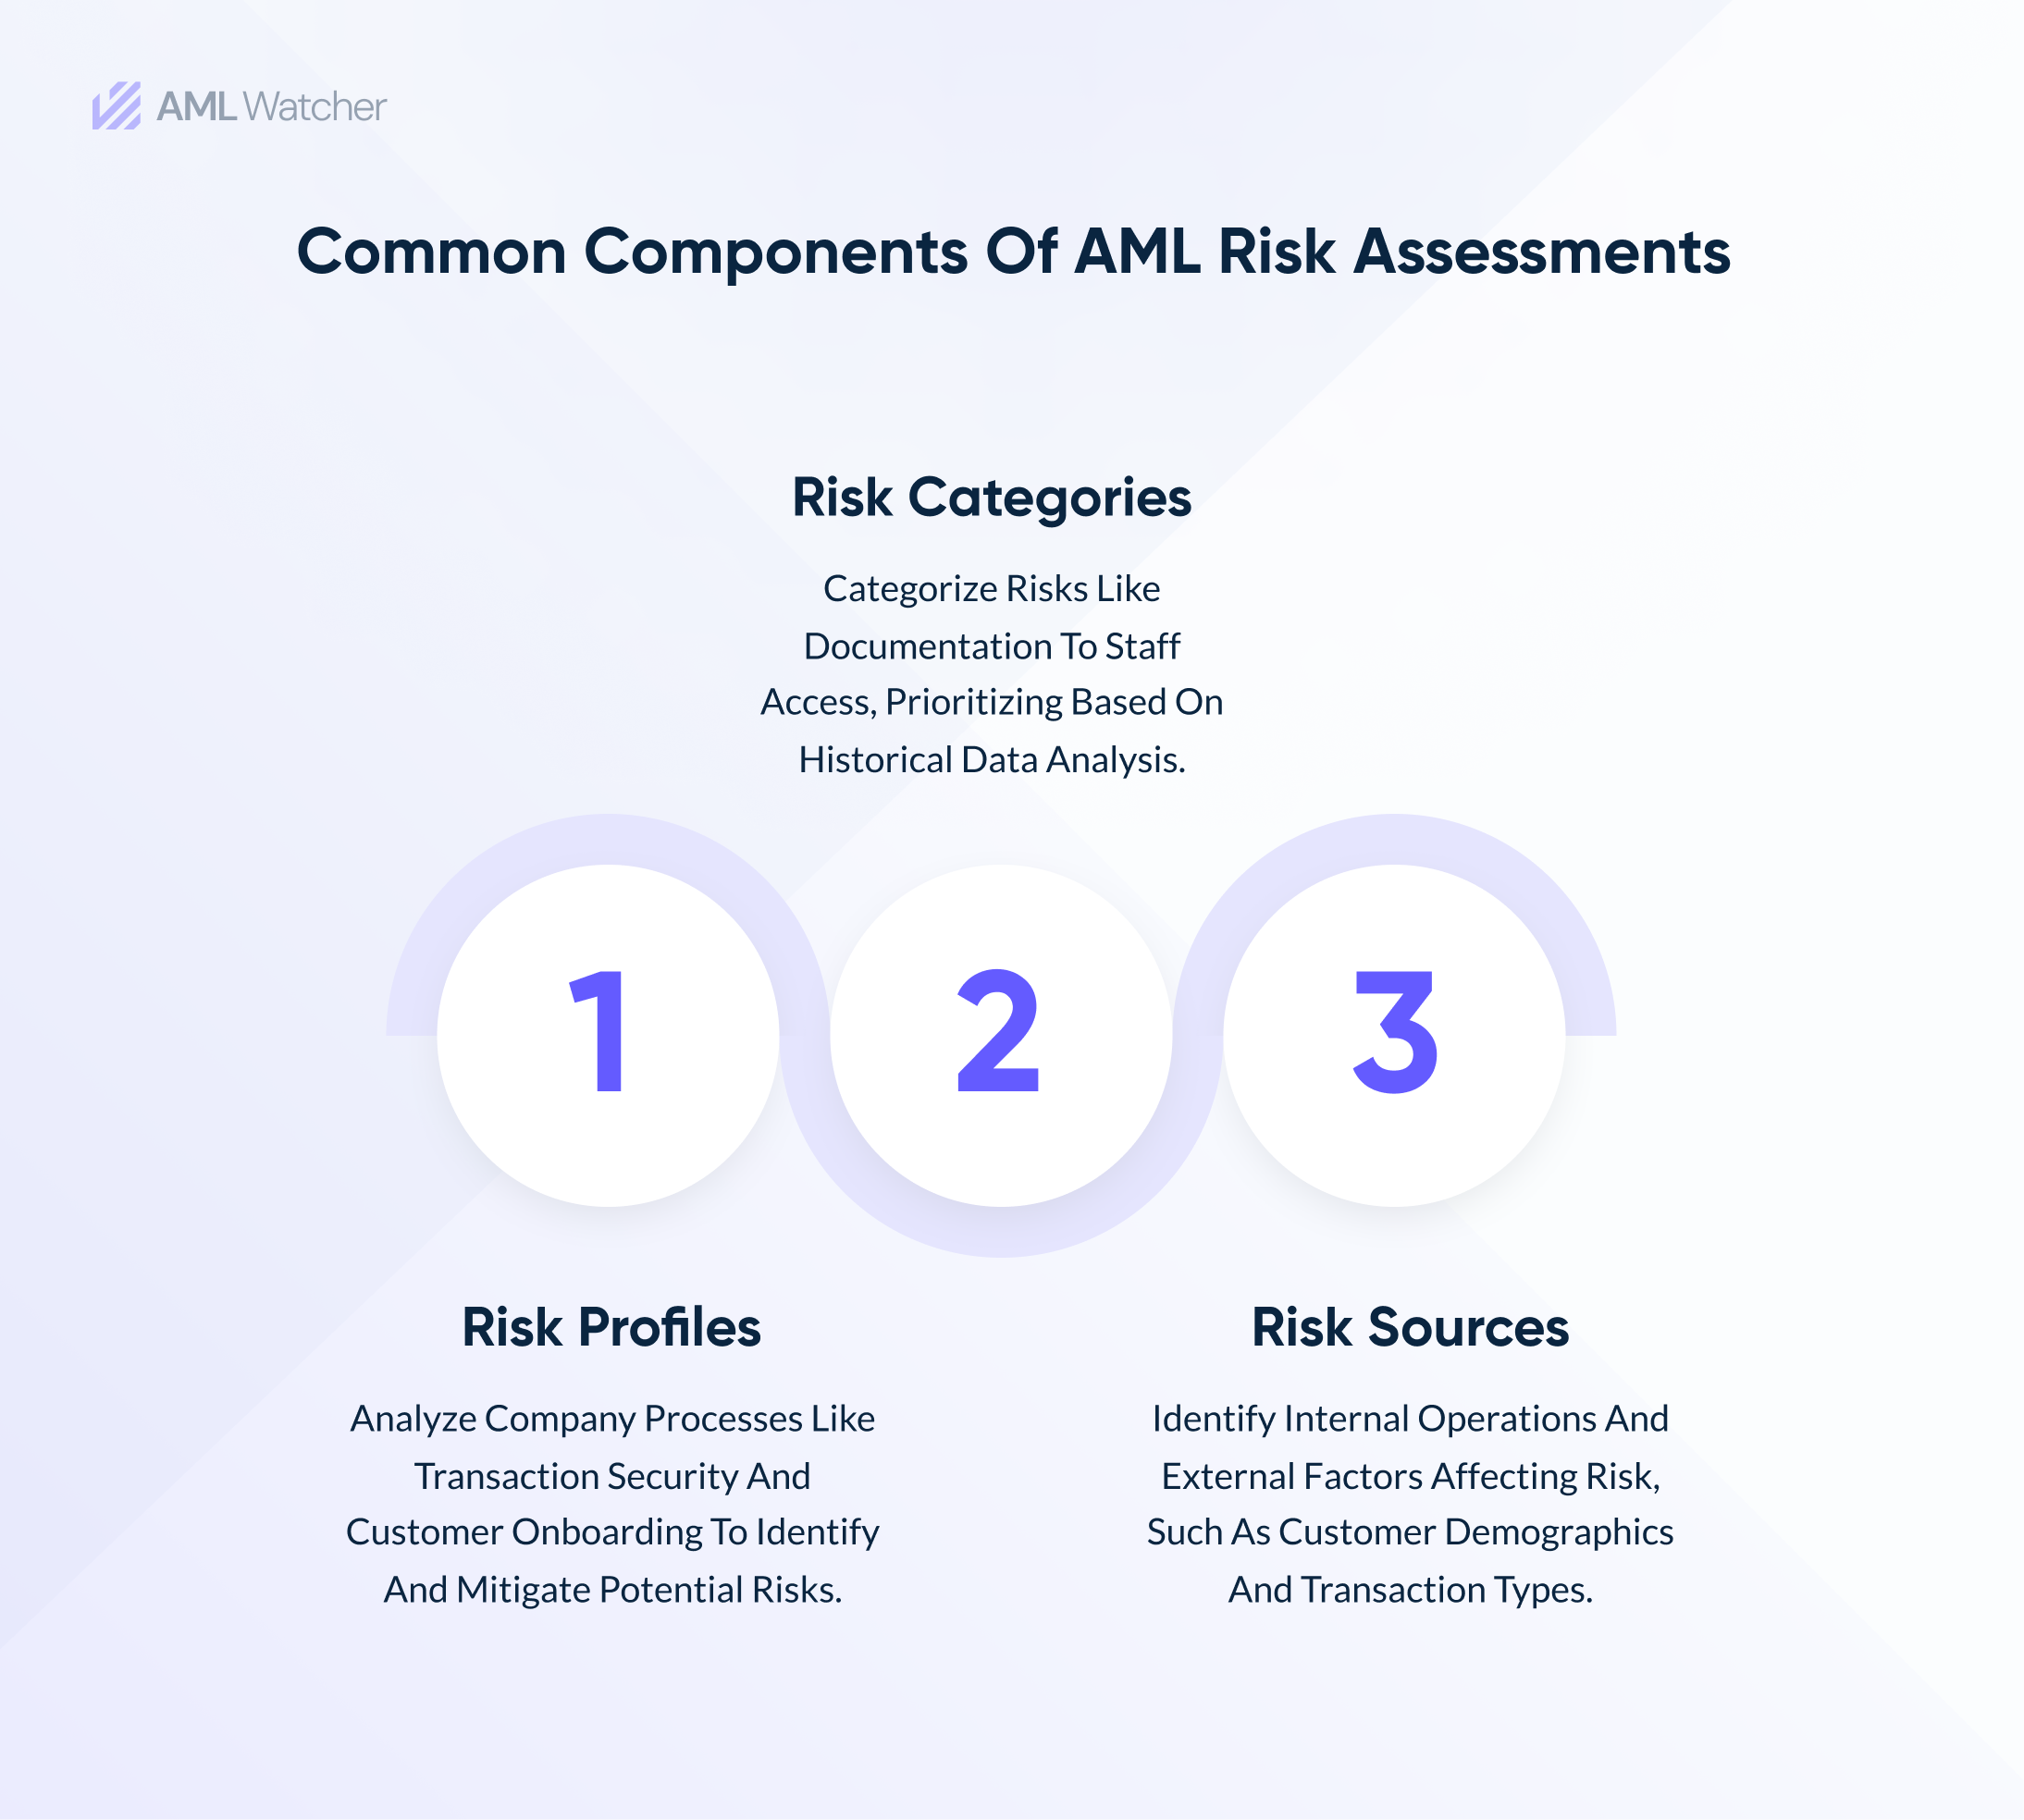 This image shows the three common components of AML compliance risk assessments.